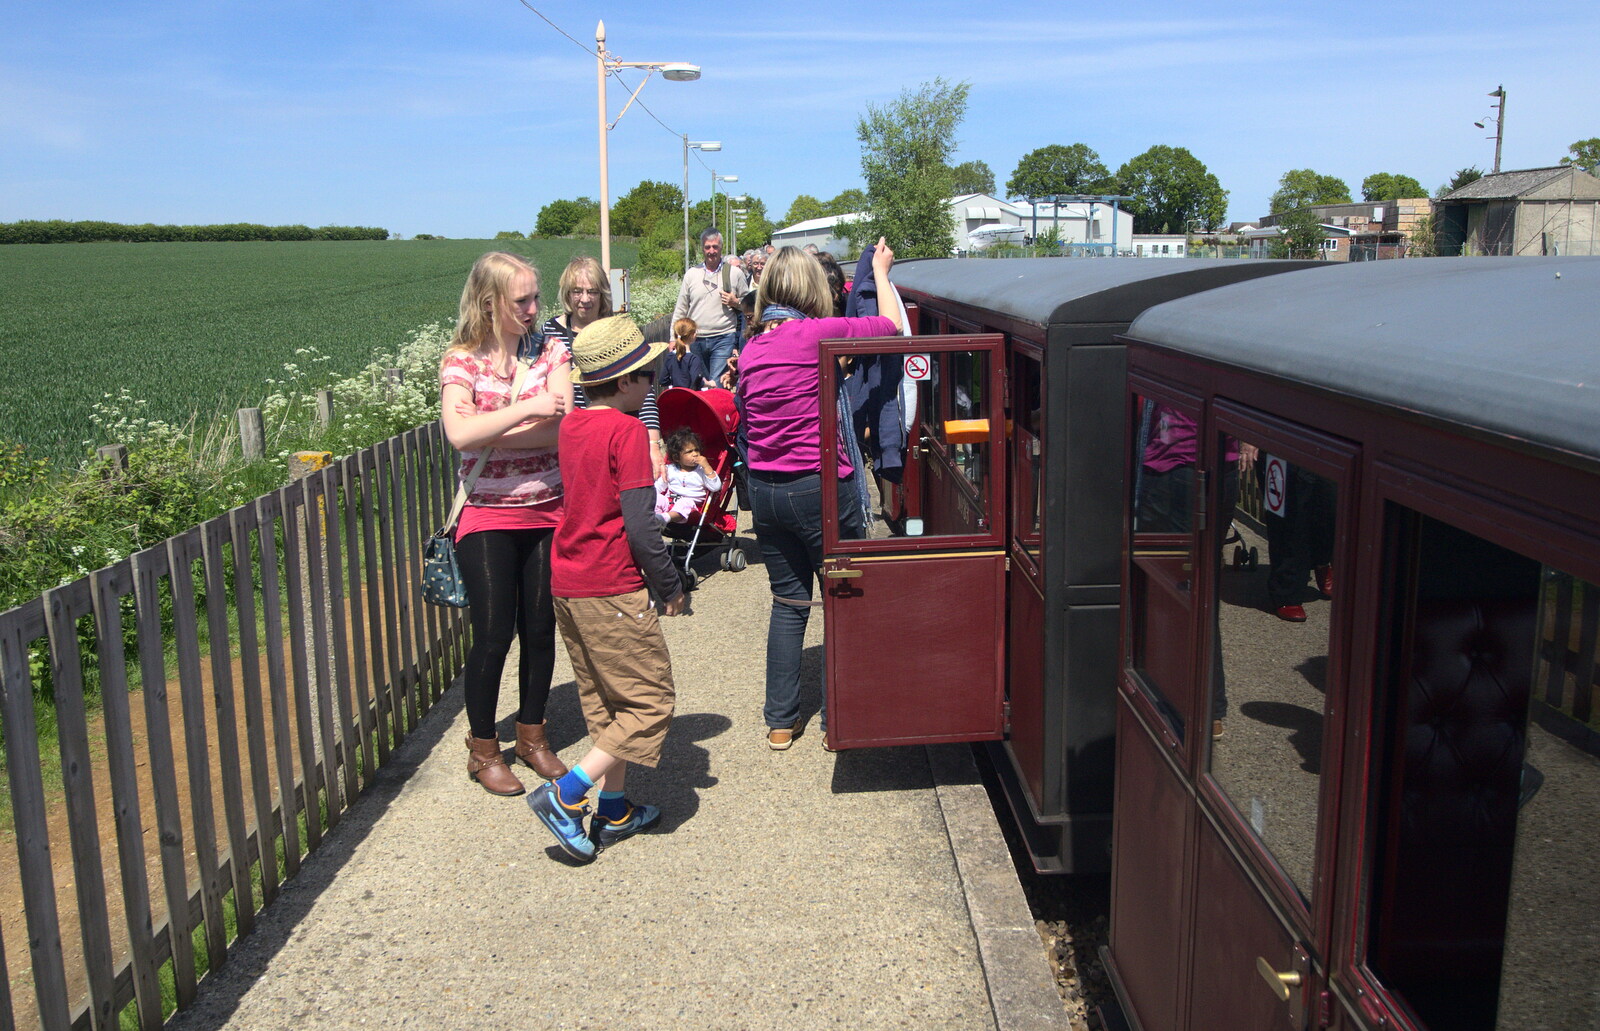 Crowds pile off the train from The Bure Valley Railway, Aylsham, Norfolk - 26th May 2013